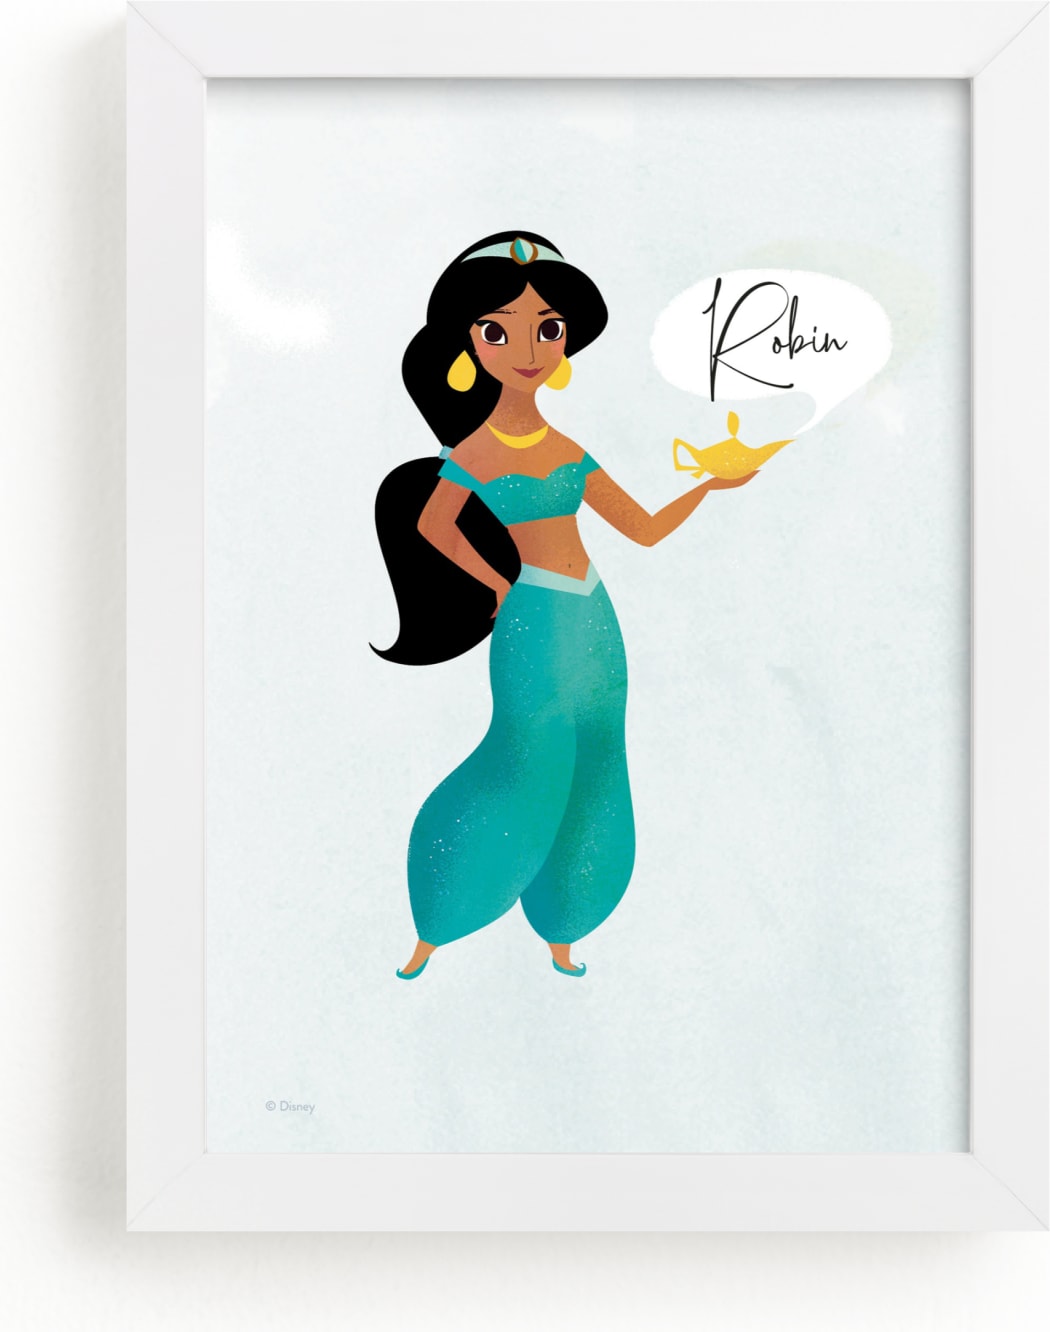 This is a blue, brown, green disney art by Lori Wemple called A Wish from Disney's Jasmine.